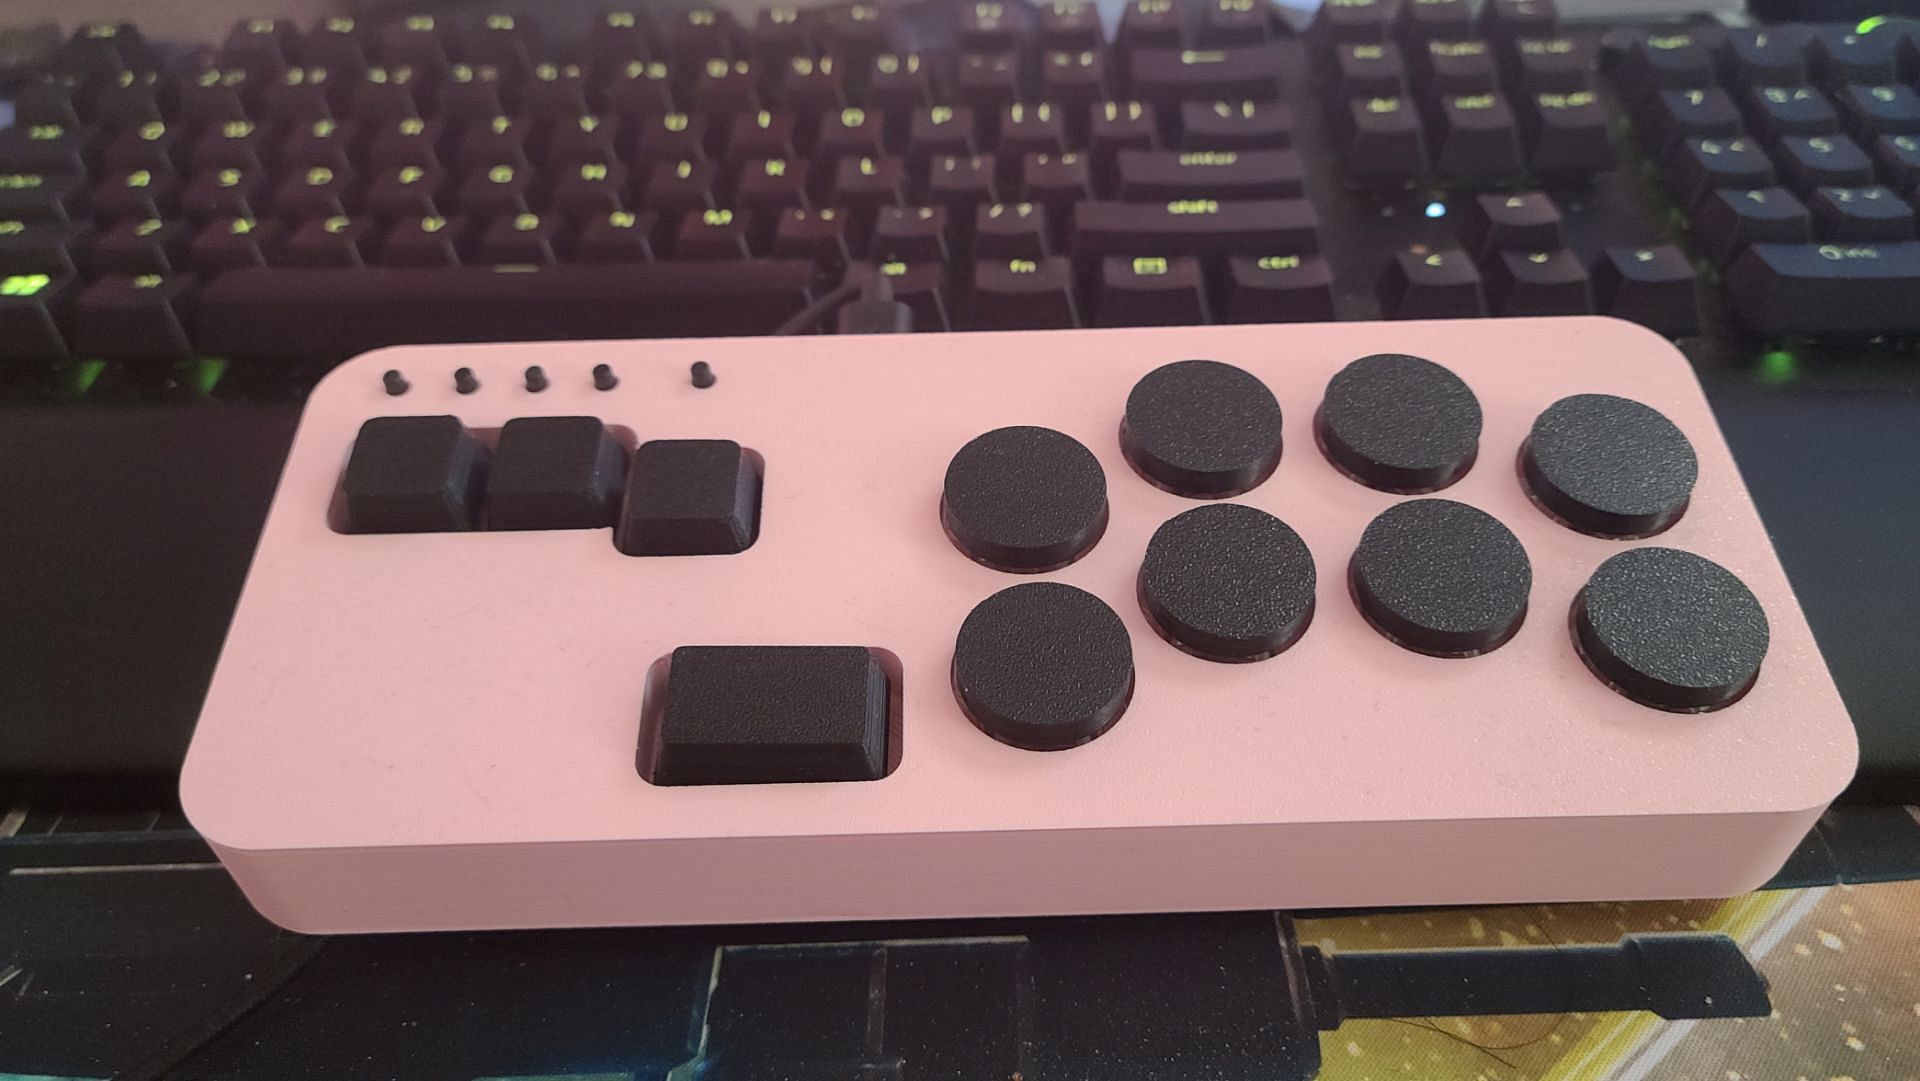 The Keybox Arcade controller for the PS4 is a beautiful, portable gaming option.